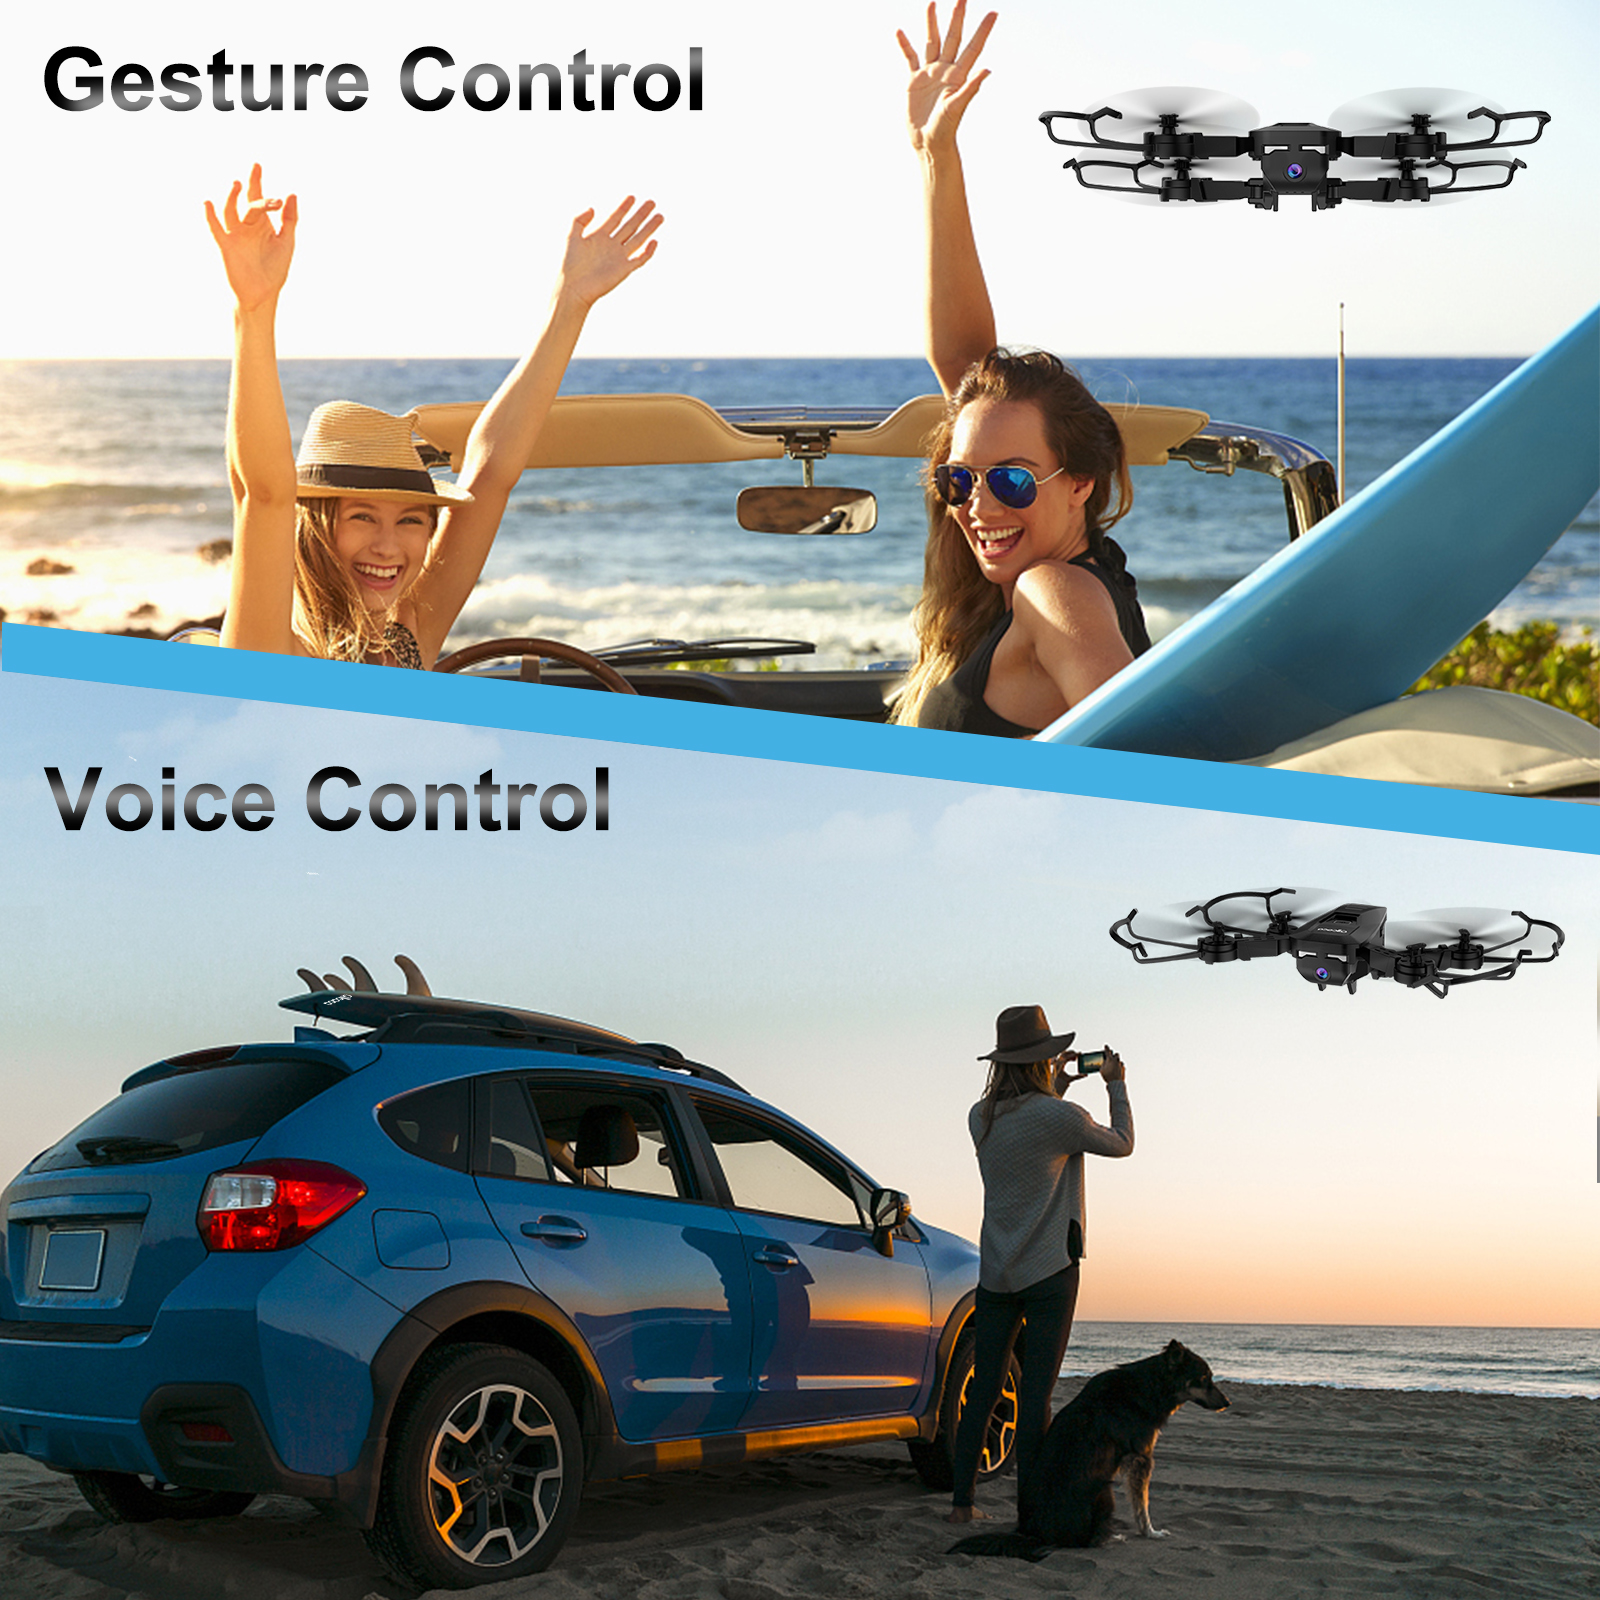 RC Quadcopter Remote Control Drone - ALLCACA RC Drone 6-axis Gyro Quadcopter Optical Flow Positioning Drone with Double 720P HD Cameras, Altitude Hold, Headless Mode and 360° Flip, Black - image 3 of 9